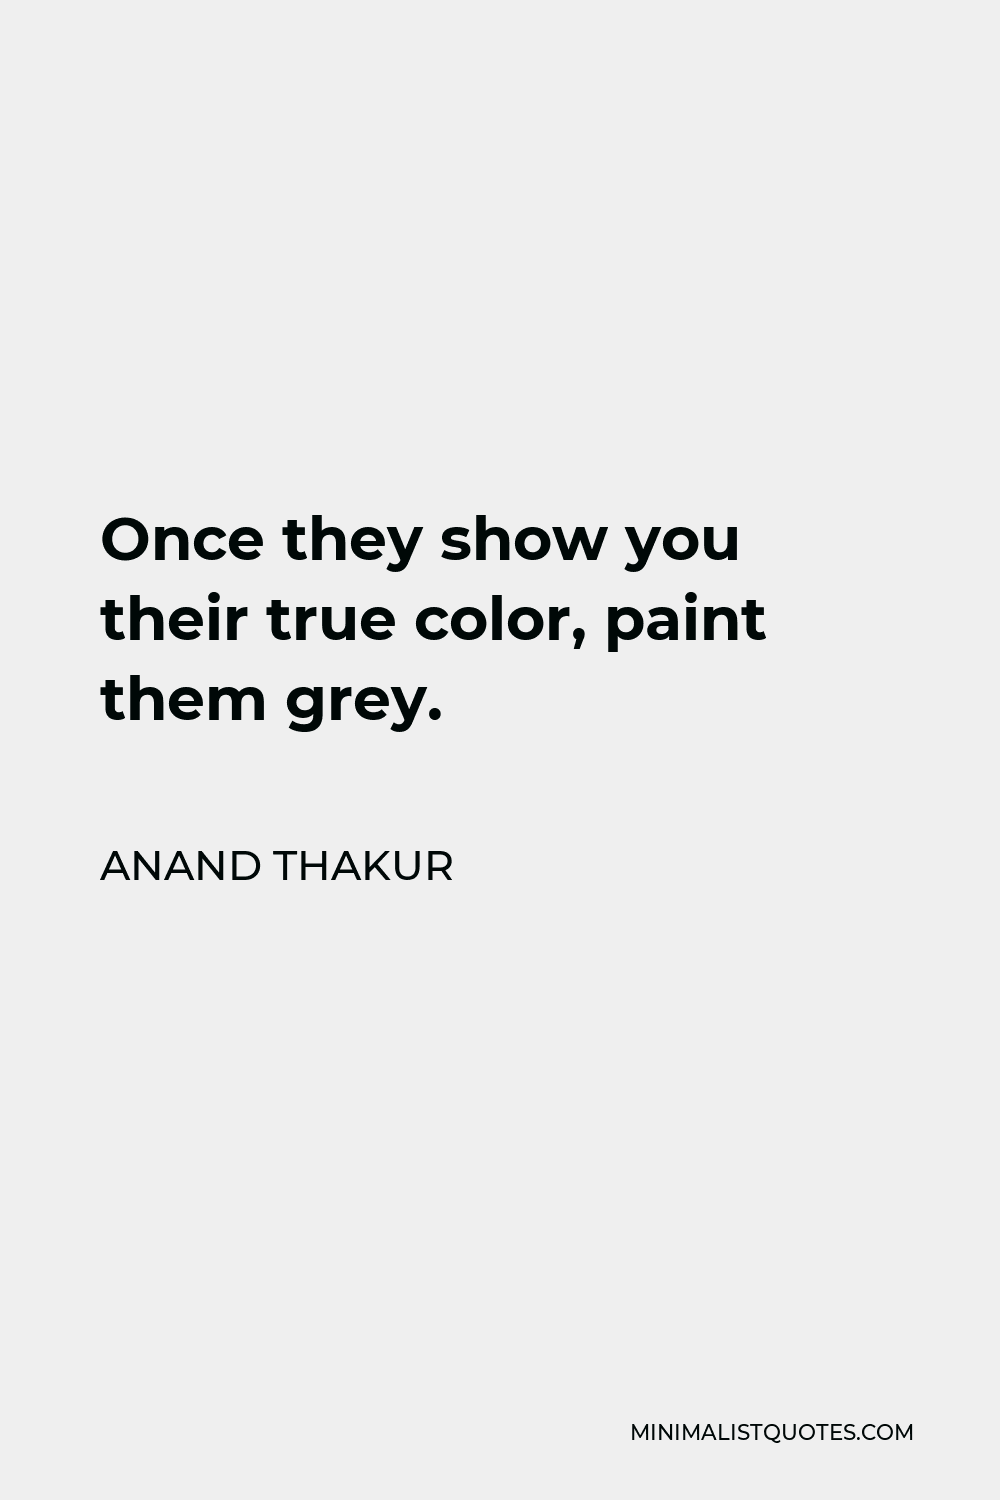 Anand Thakur Quote: Once they show you their true color,